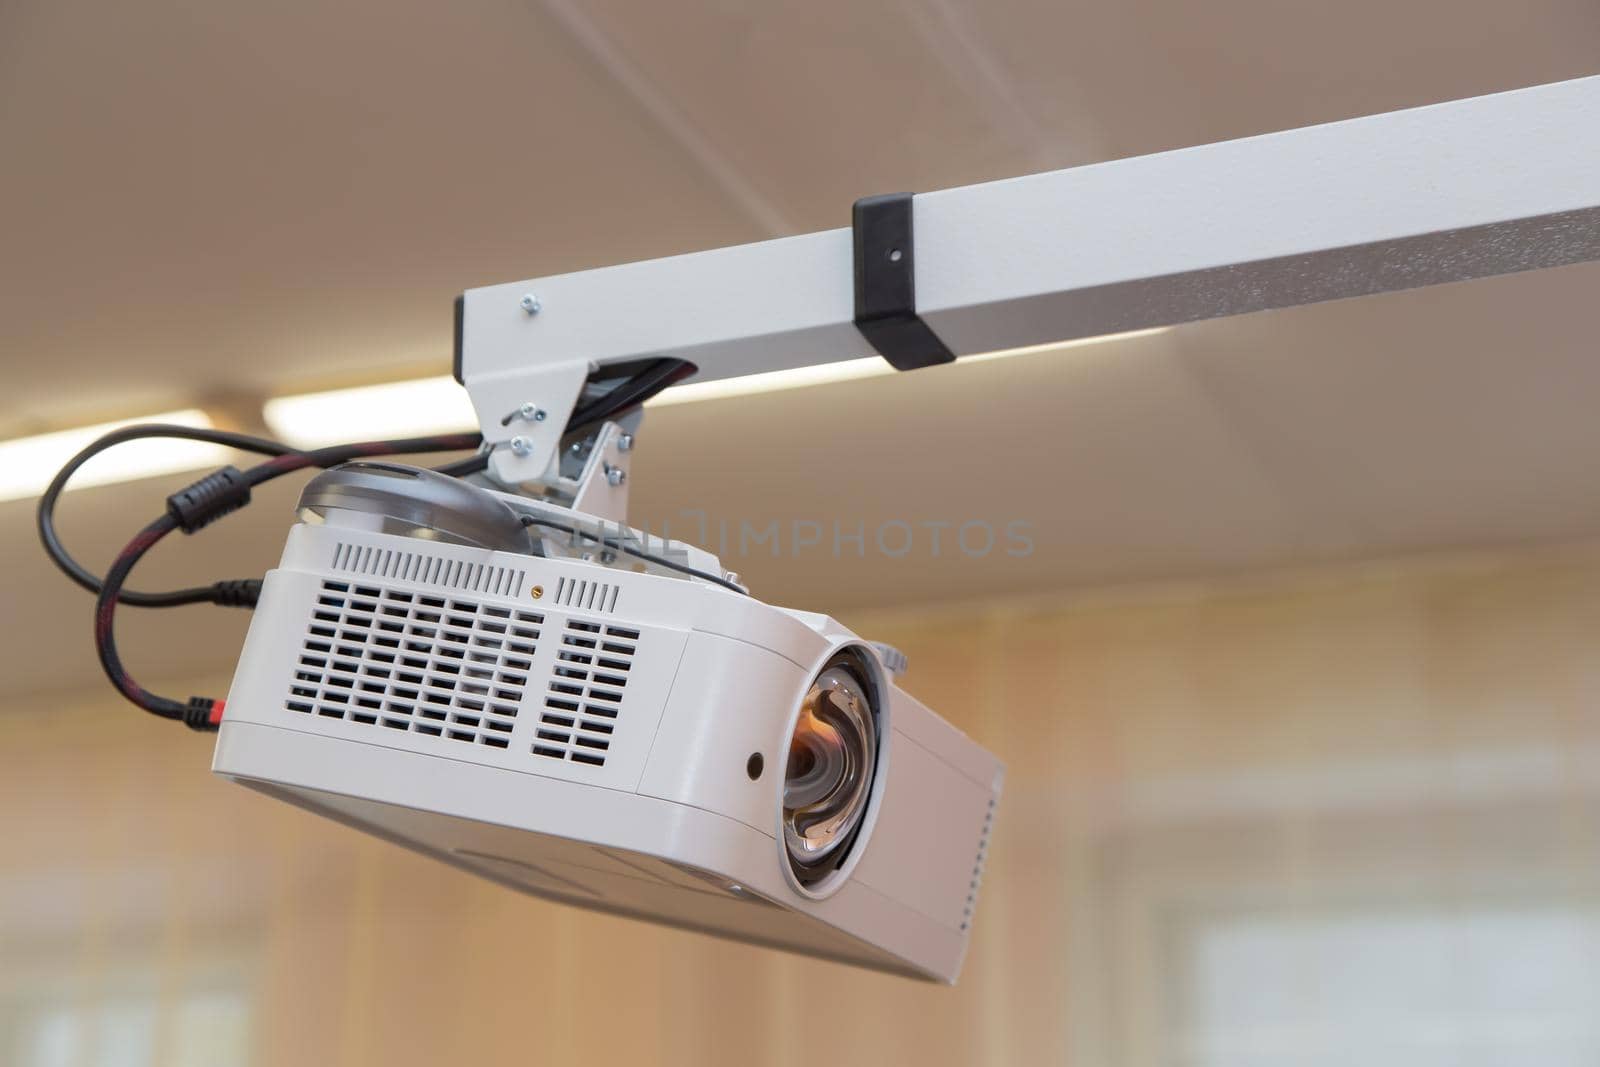 The video projector hangs from the ceiling on a white bracket. The fluorescent lamps are on at the back. Window openings and curtains out of focus.